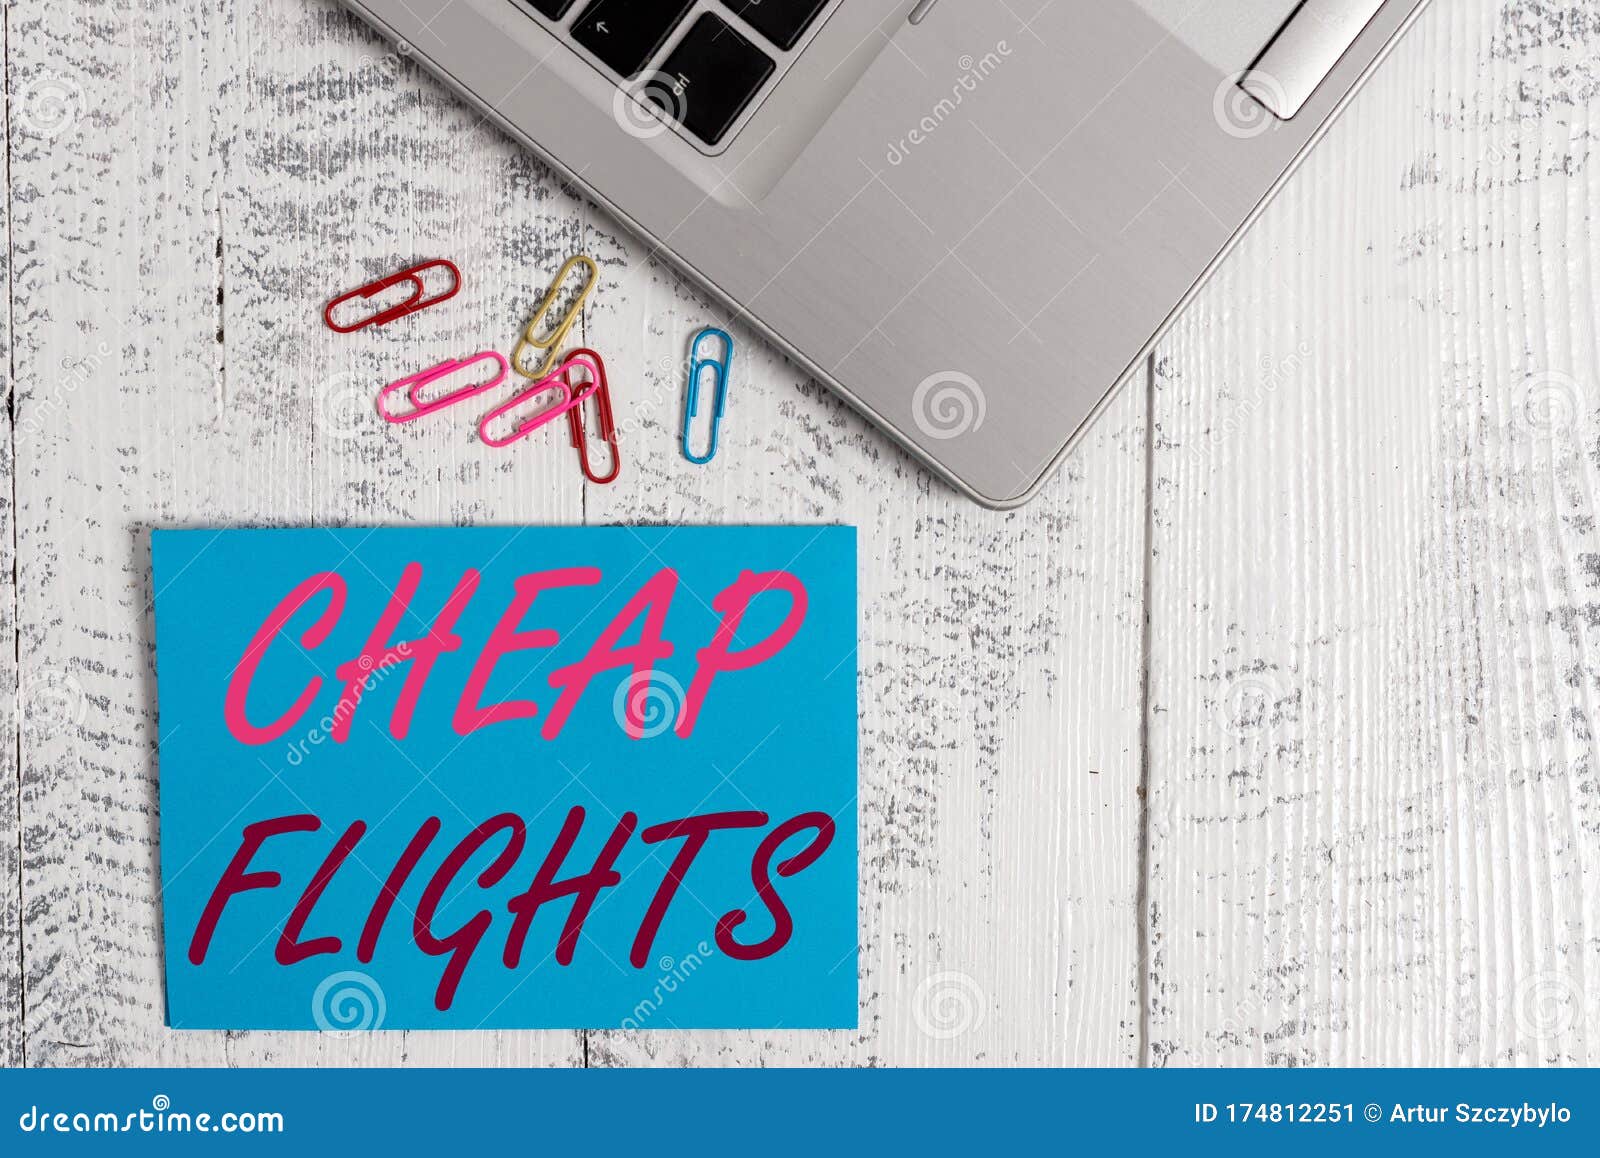 Advantages and disadvantages of cheap air travel – Little place to study and rest